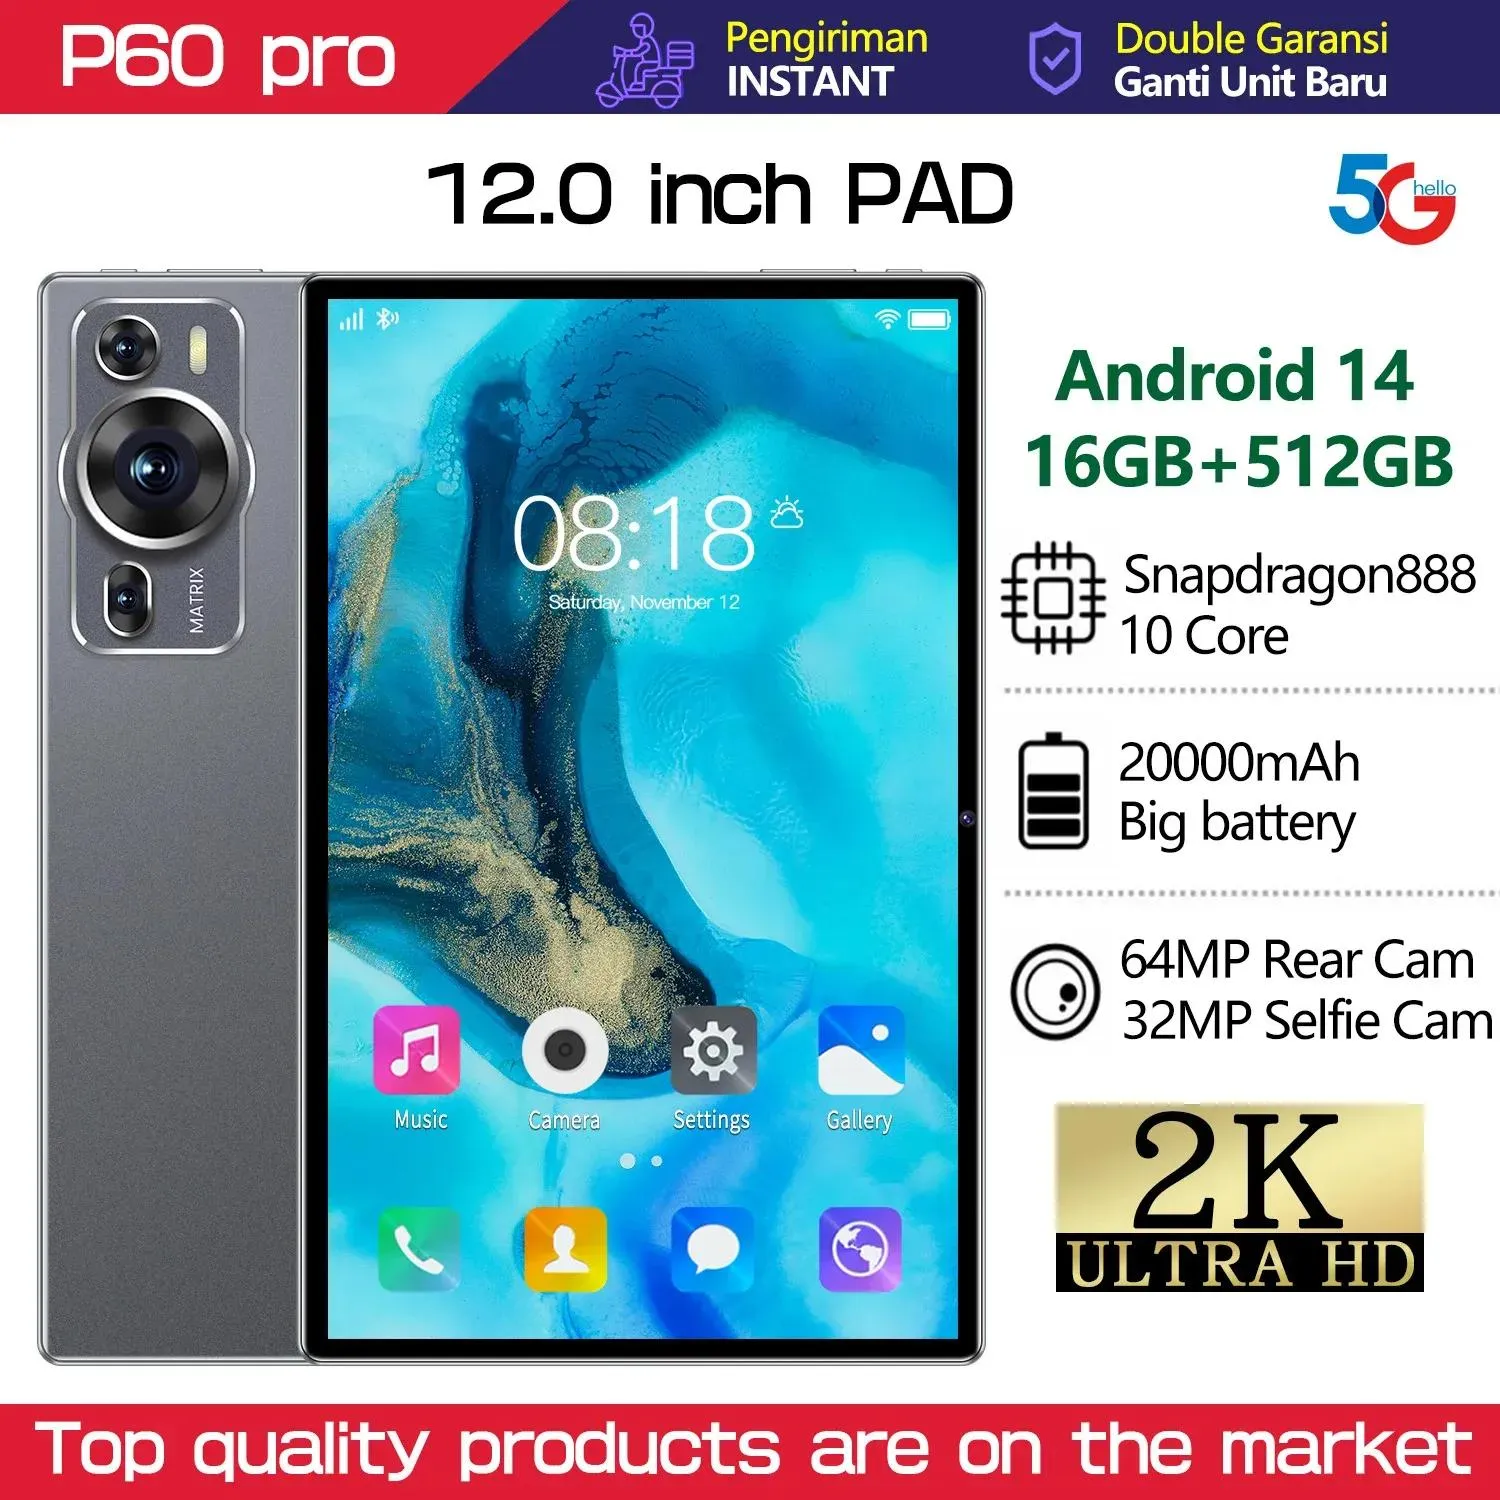 Brand PC Touch Tablet Android P60 Pro Global Tablette 12,0 tum HD 16G+512 GB Snapdragon 888 5G Dual Sim Card eller WiFi Google Play Te